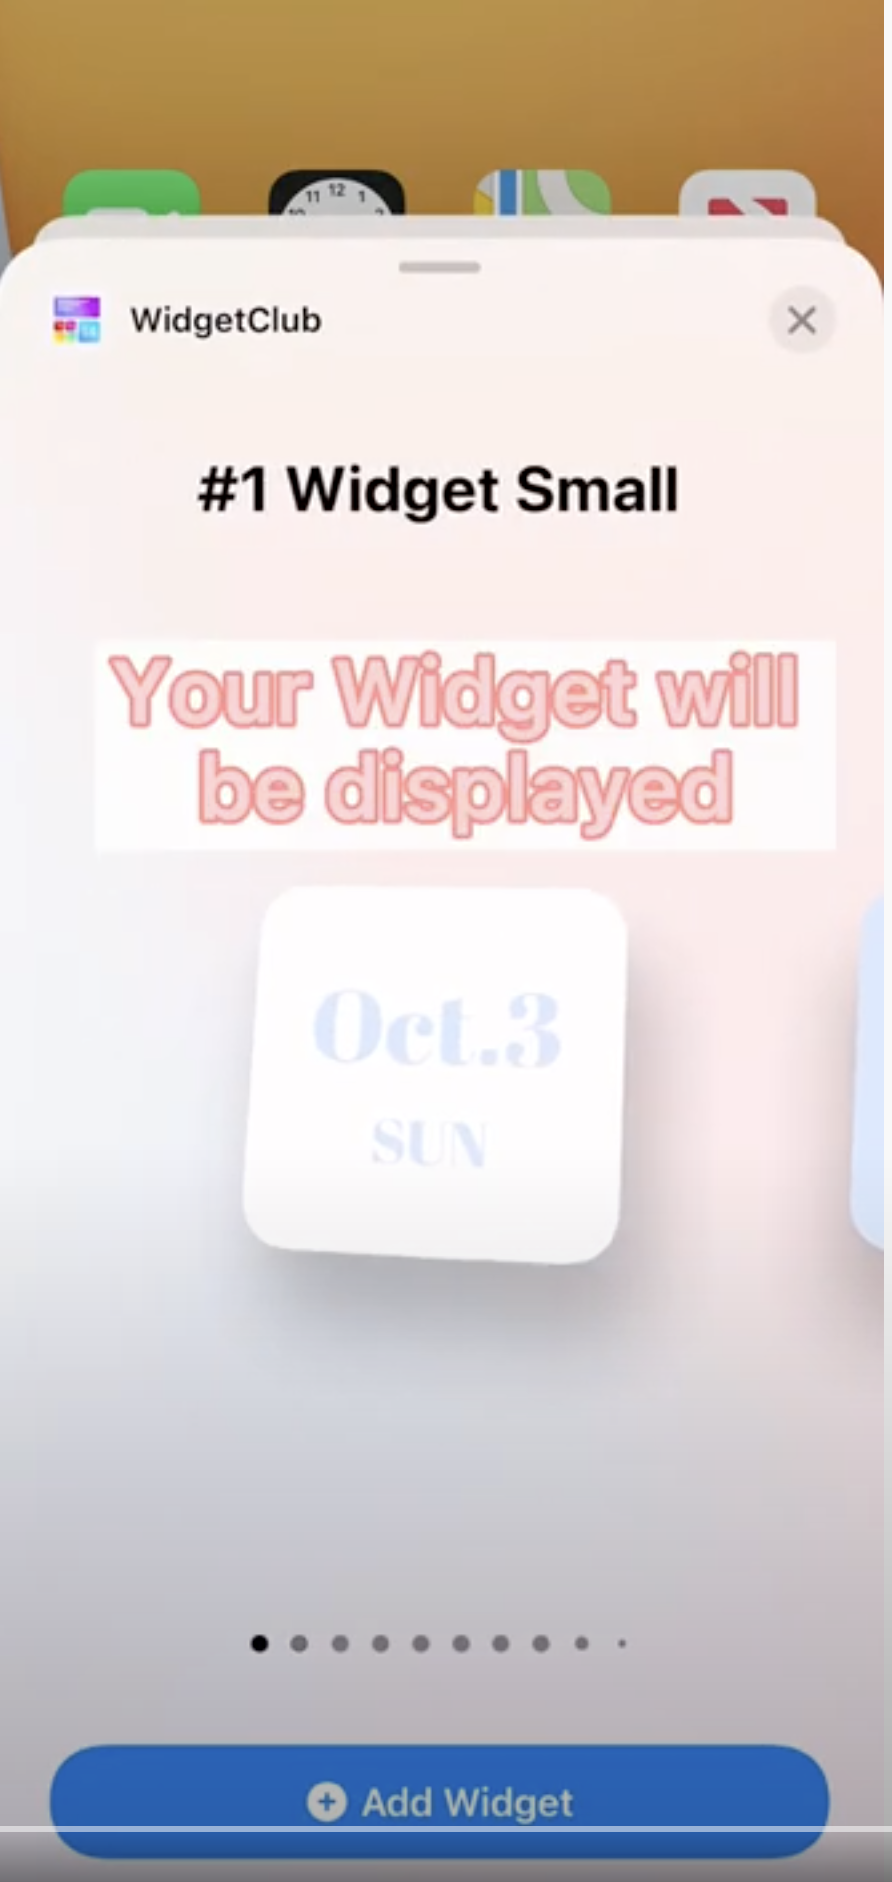 #4 image of [iOS]How to add widget to my home screen